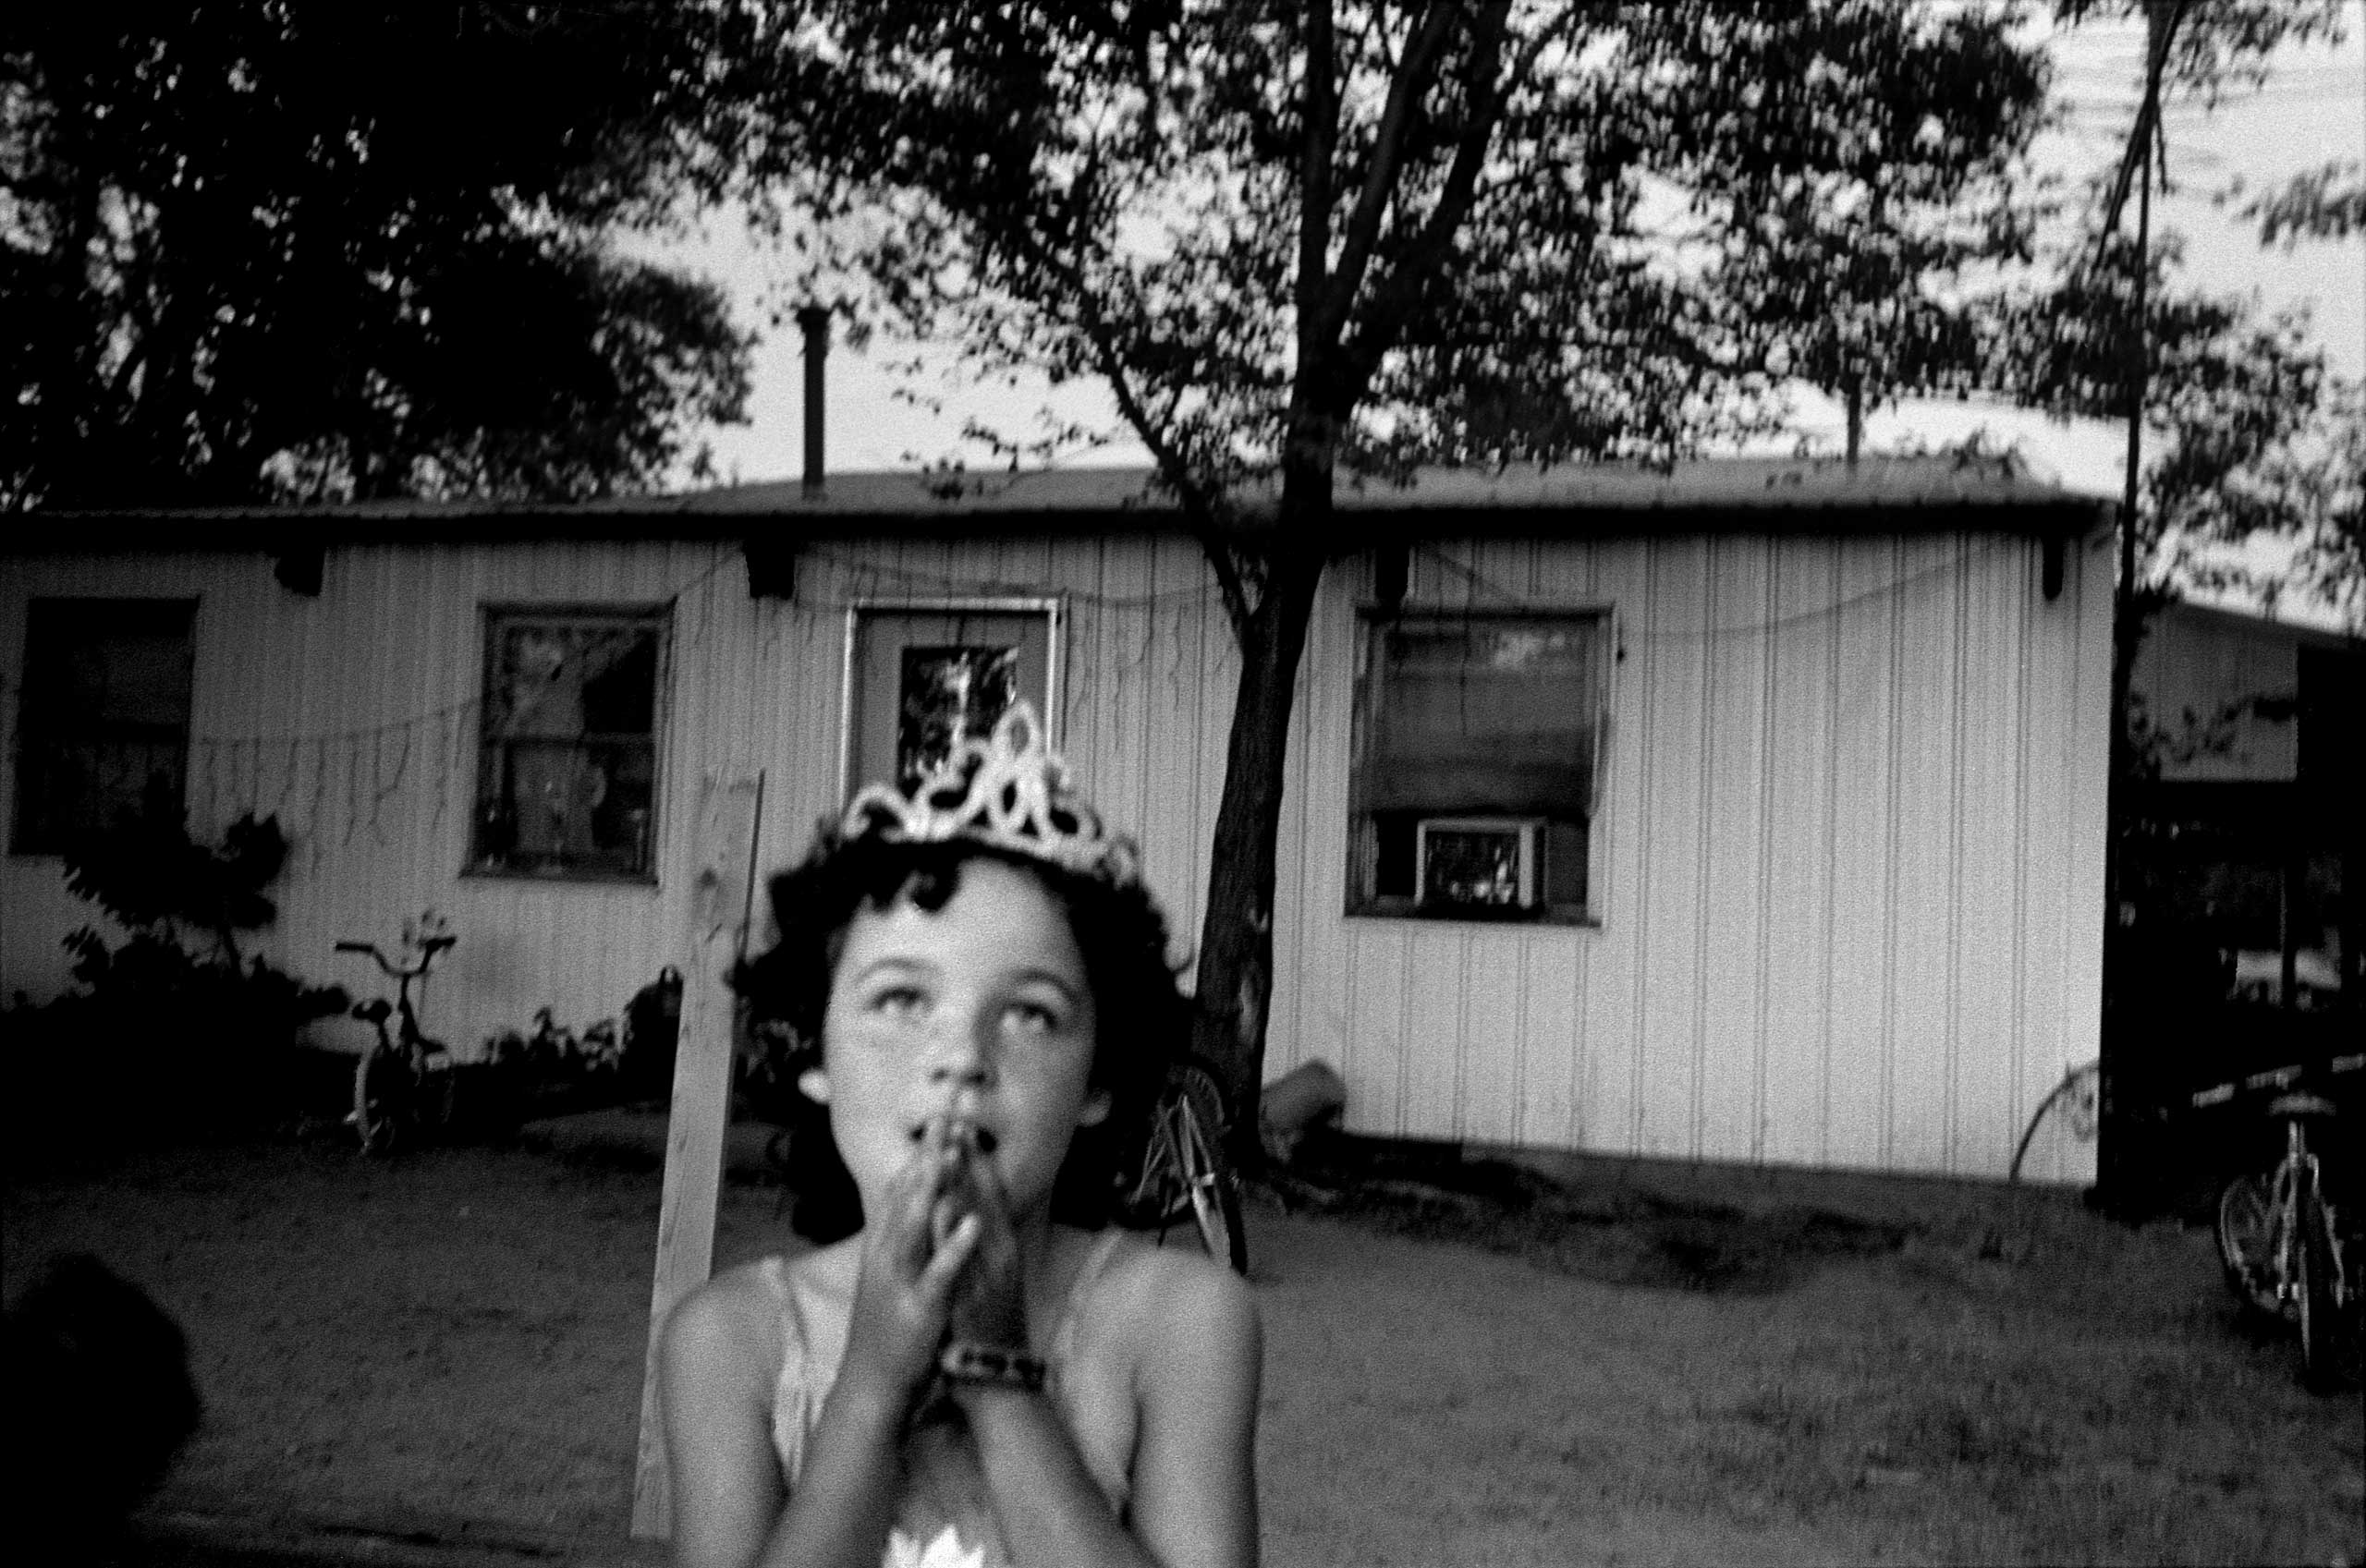 A young girl dreams of becoming a summer festival queen like her older sister, Conesville, Iowa.